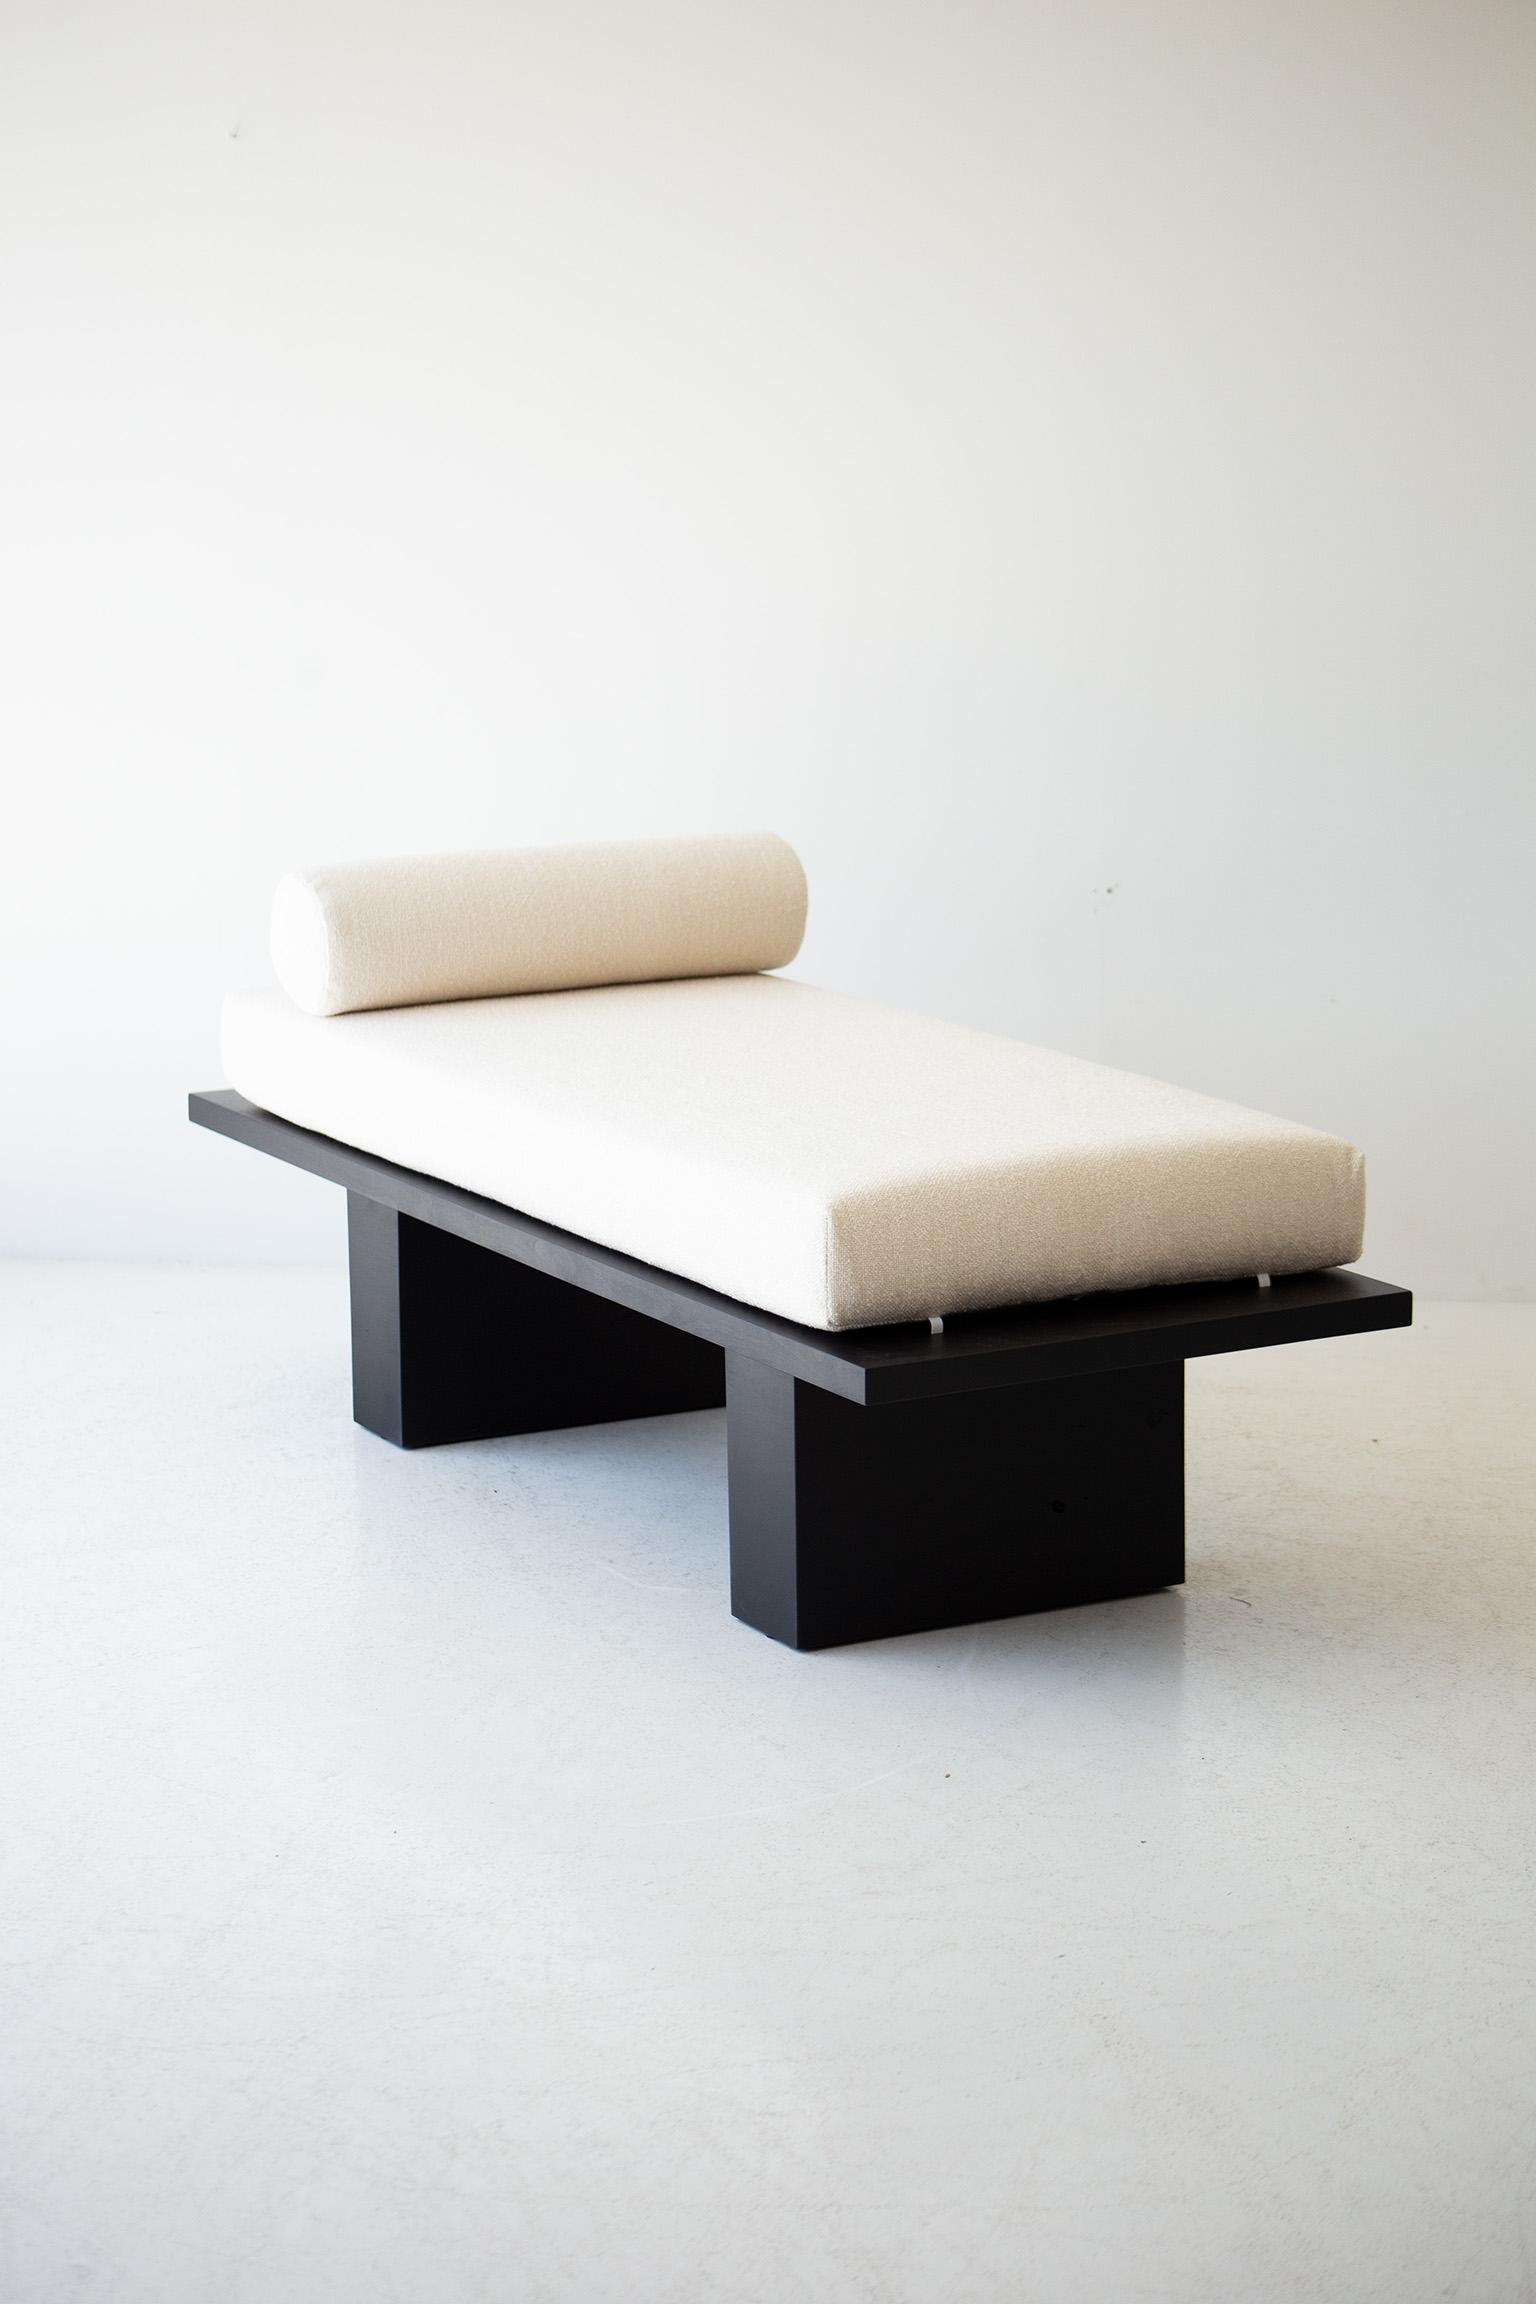 Contemporary Bertu Benches, Suelo Modern Bench, Lumbar Pillows, Upholstered, White, Black For Sale